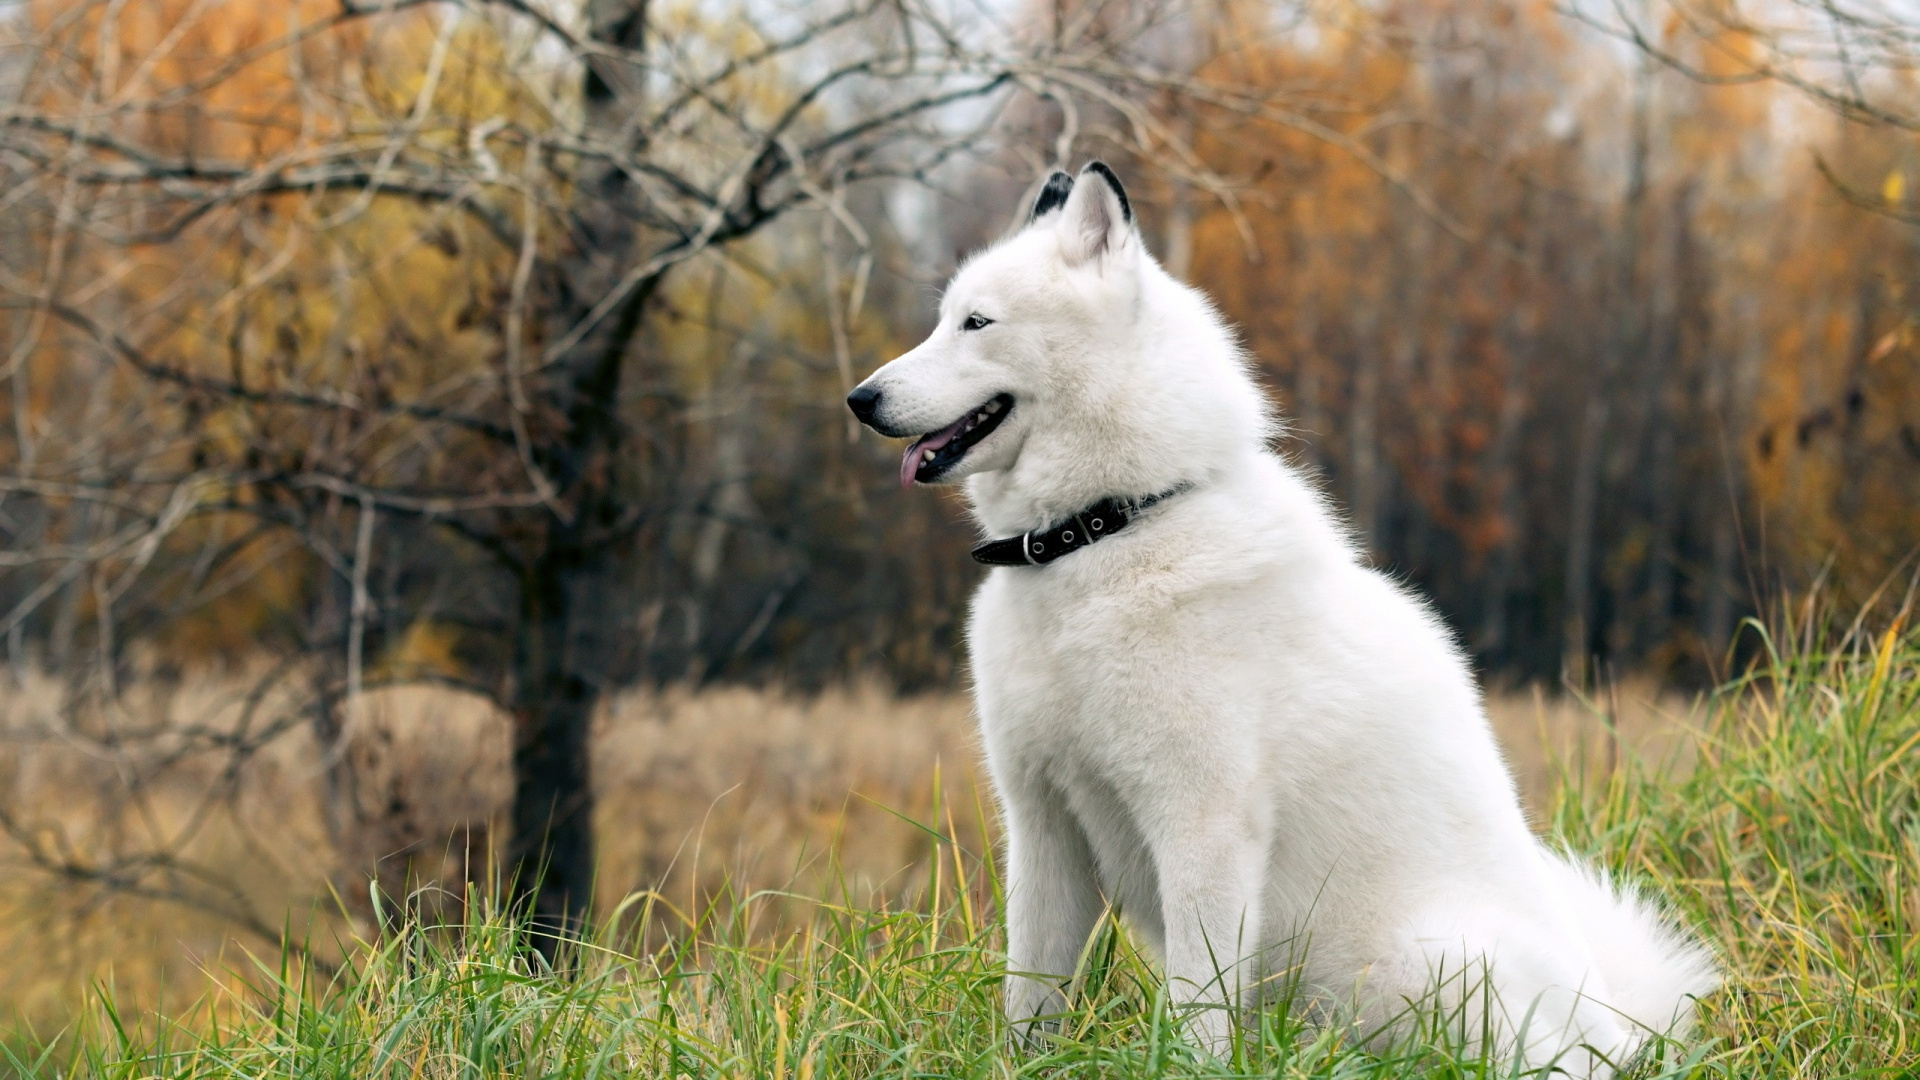 White Siberian Husky Puppy on Green Grass Field During Daytime. Wallpaper in 1920x1080 Resolution